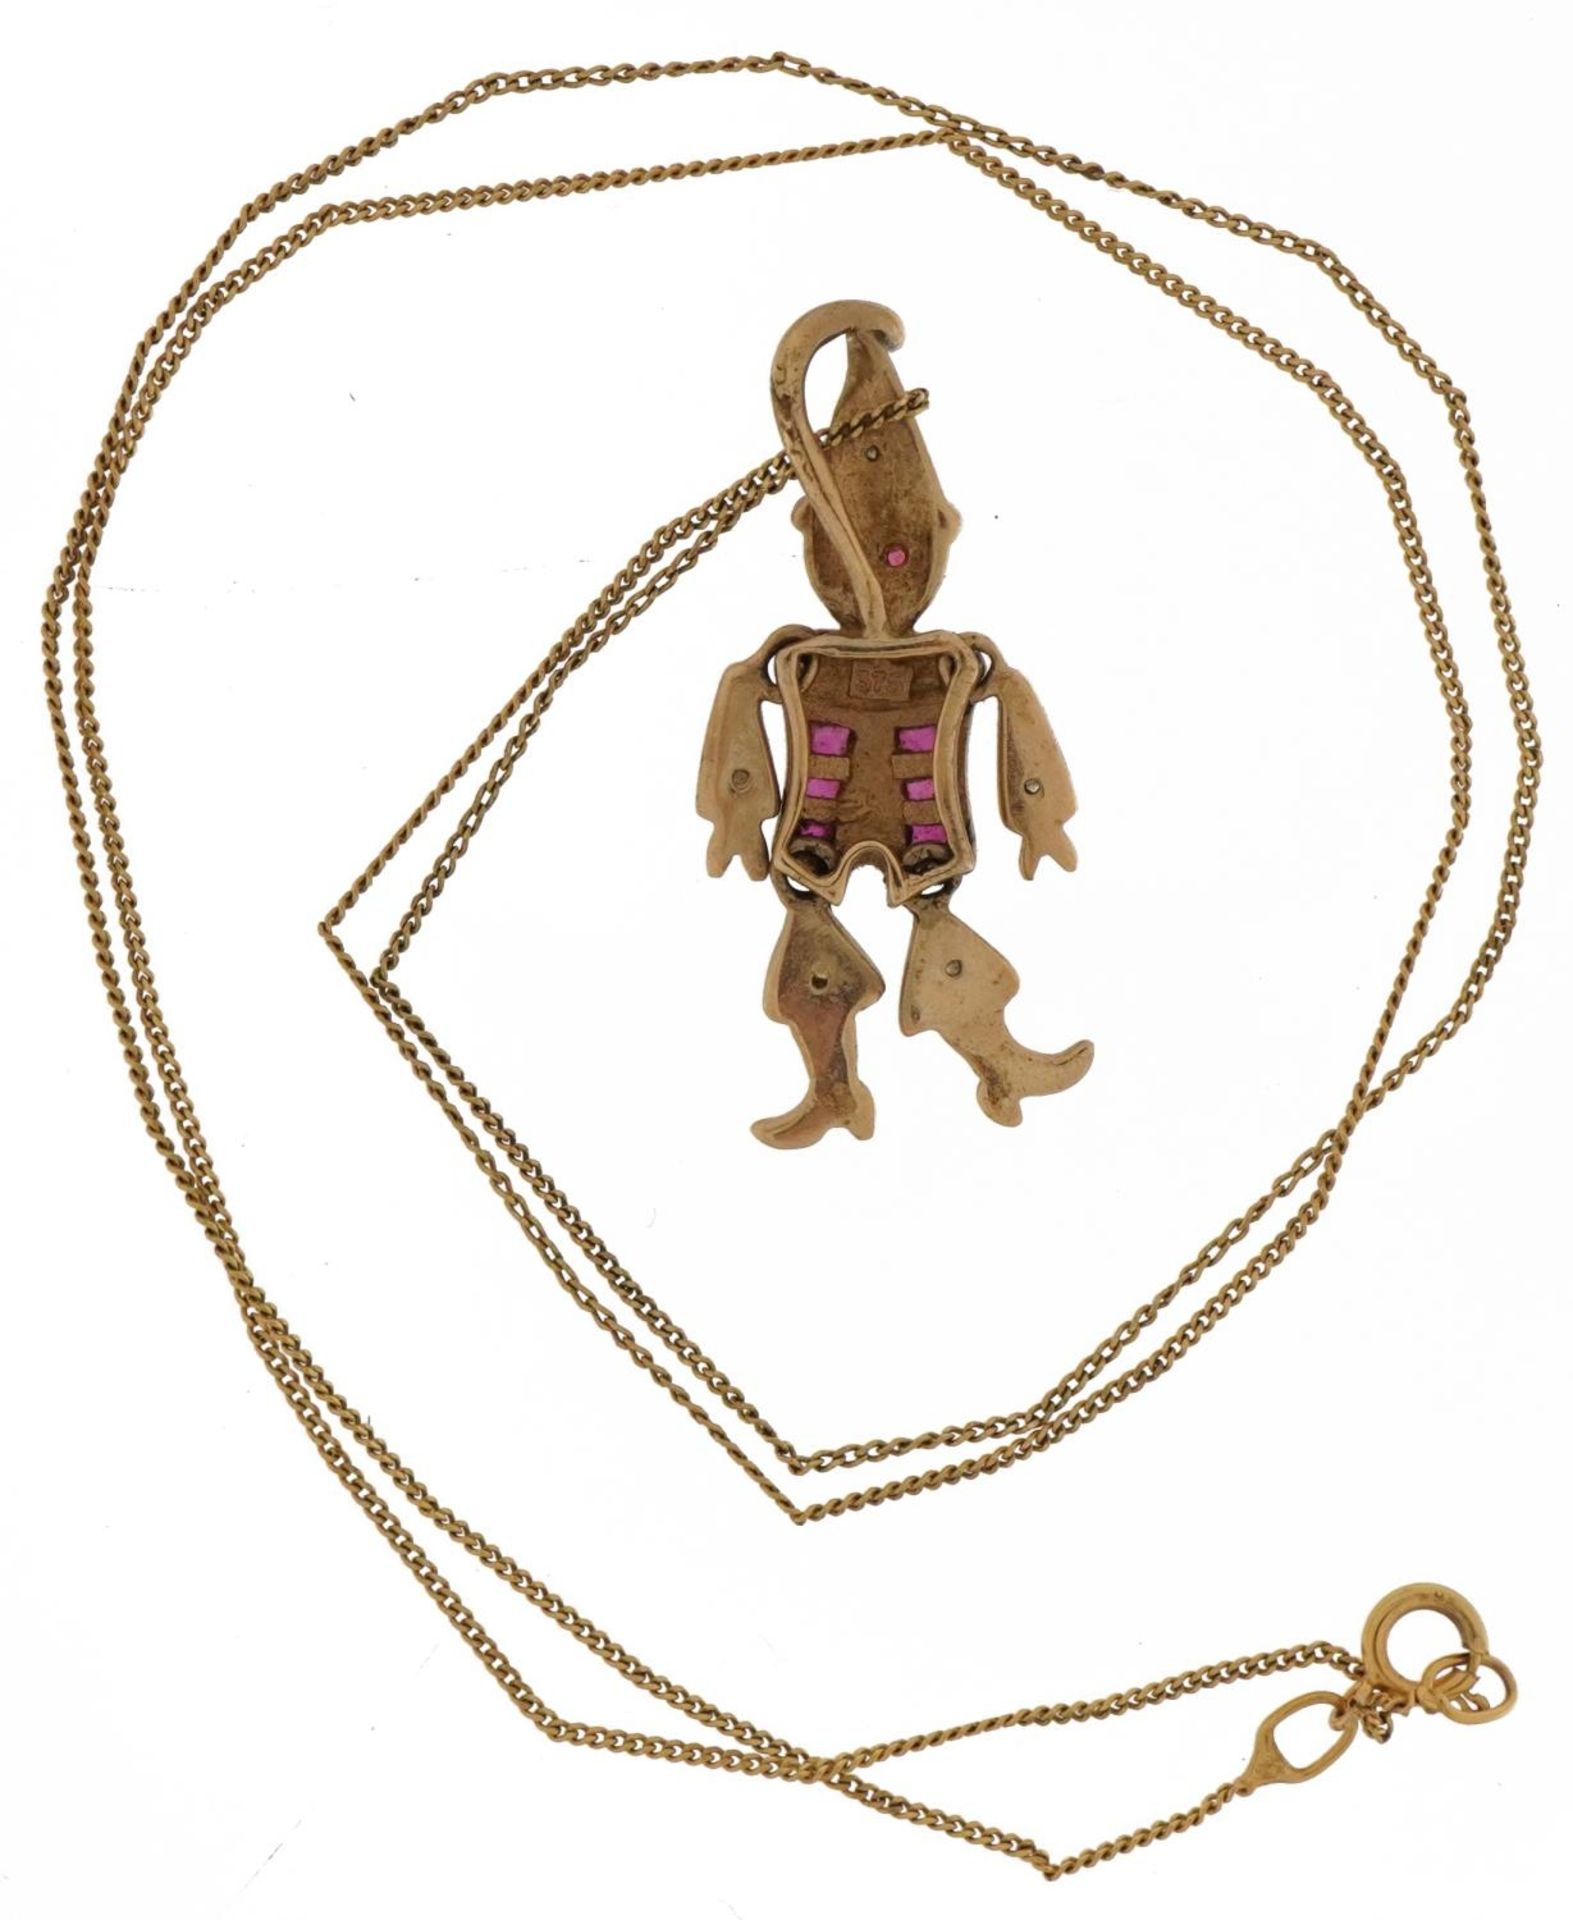 9ct gold ruby and diamond clown pendant with articulated limbs on a 9ct gold necklace, 2.5cm high - Image 3 of 4